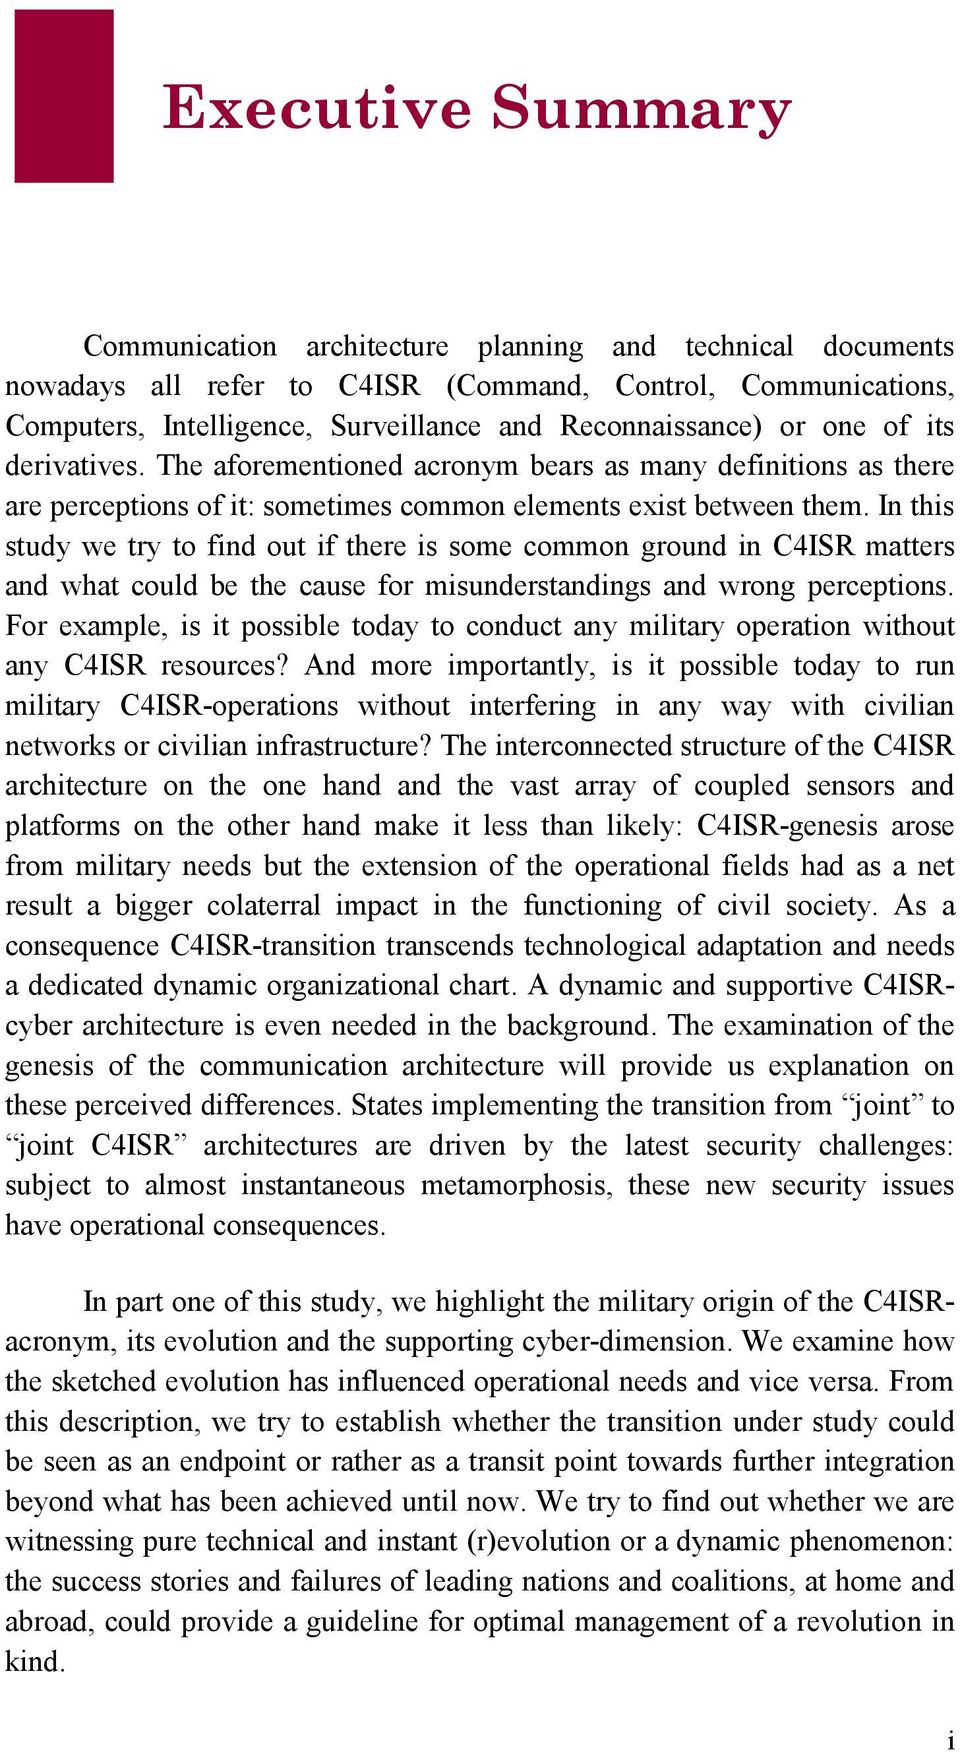 In this study we try to find out if there is some common ground in C4ISR matters and what could be the cause for misunderstandings and wrong perceptions.